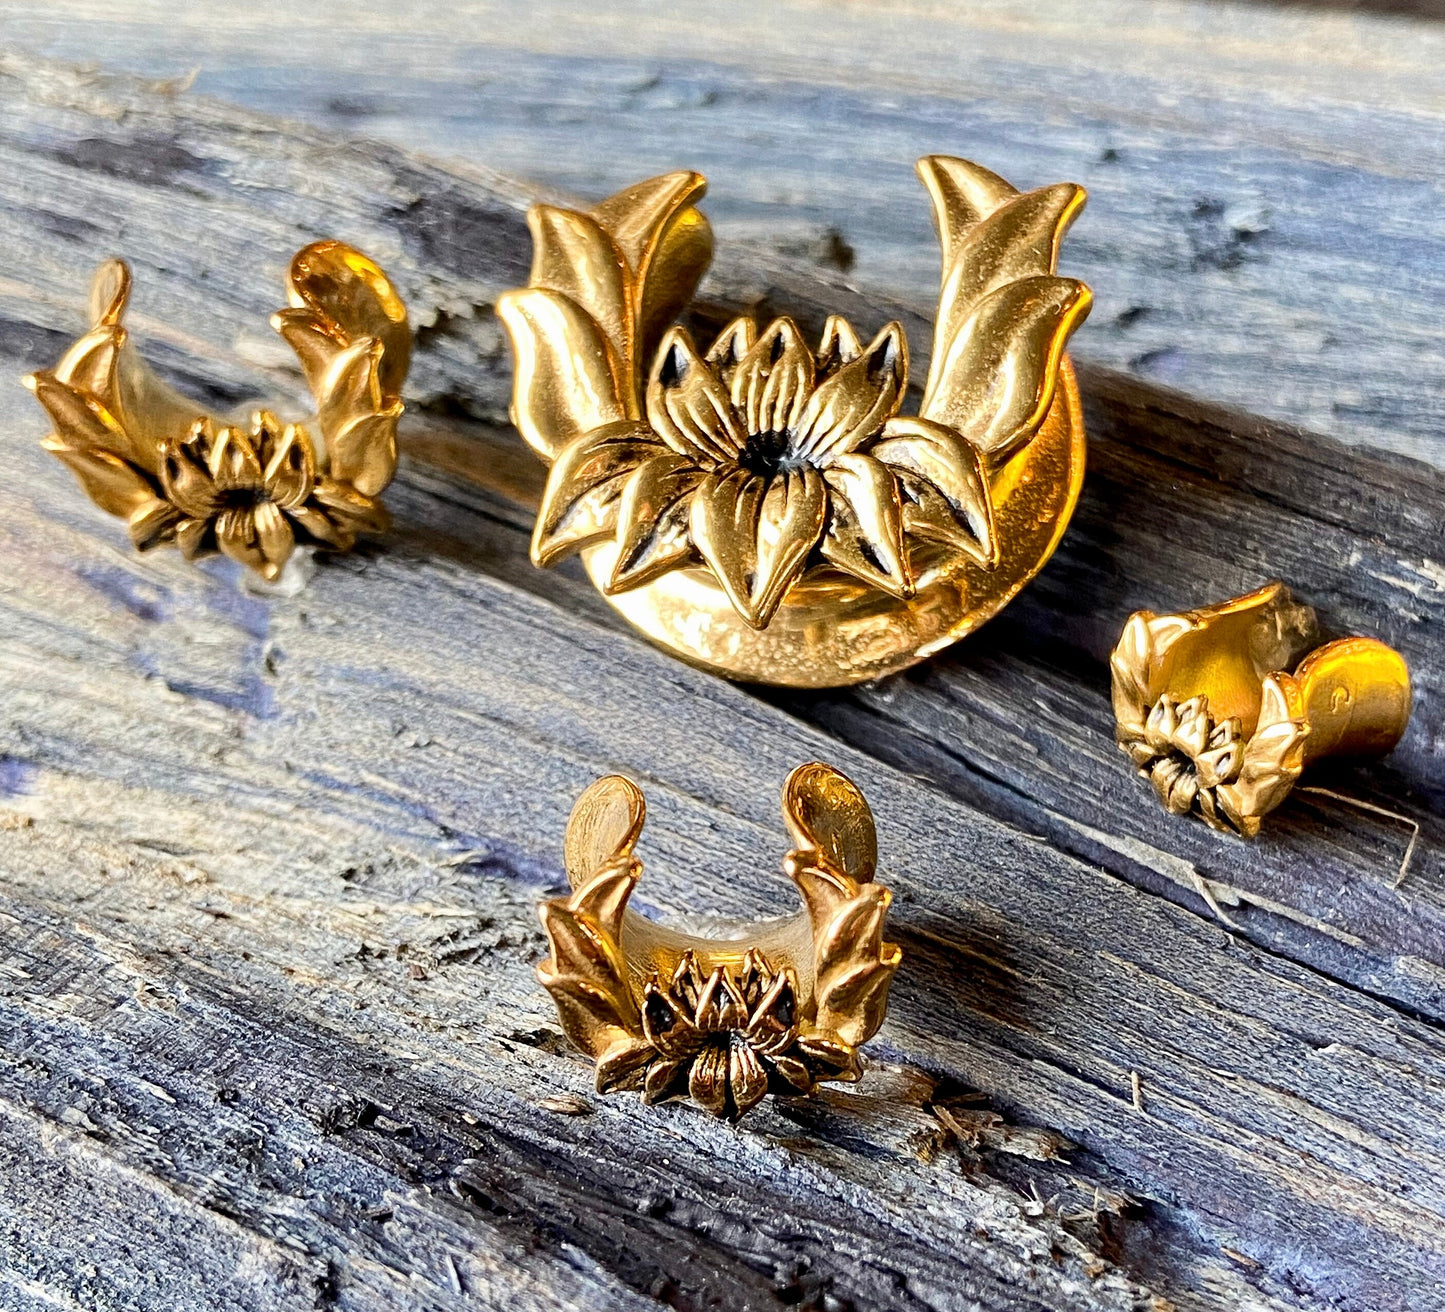 PAIR of Unique Gold Plated Lotus Flower Ear Spreader Surgical Steel Tunnels/Plugs - Gauges 0g (8mm) through 3/4" (19mm) available!